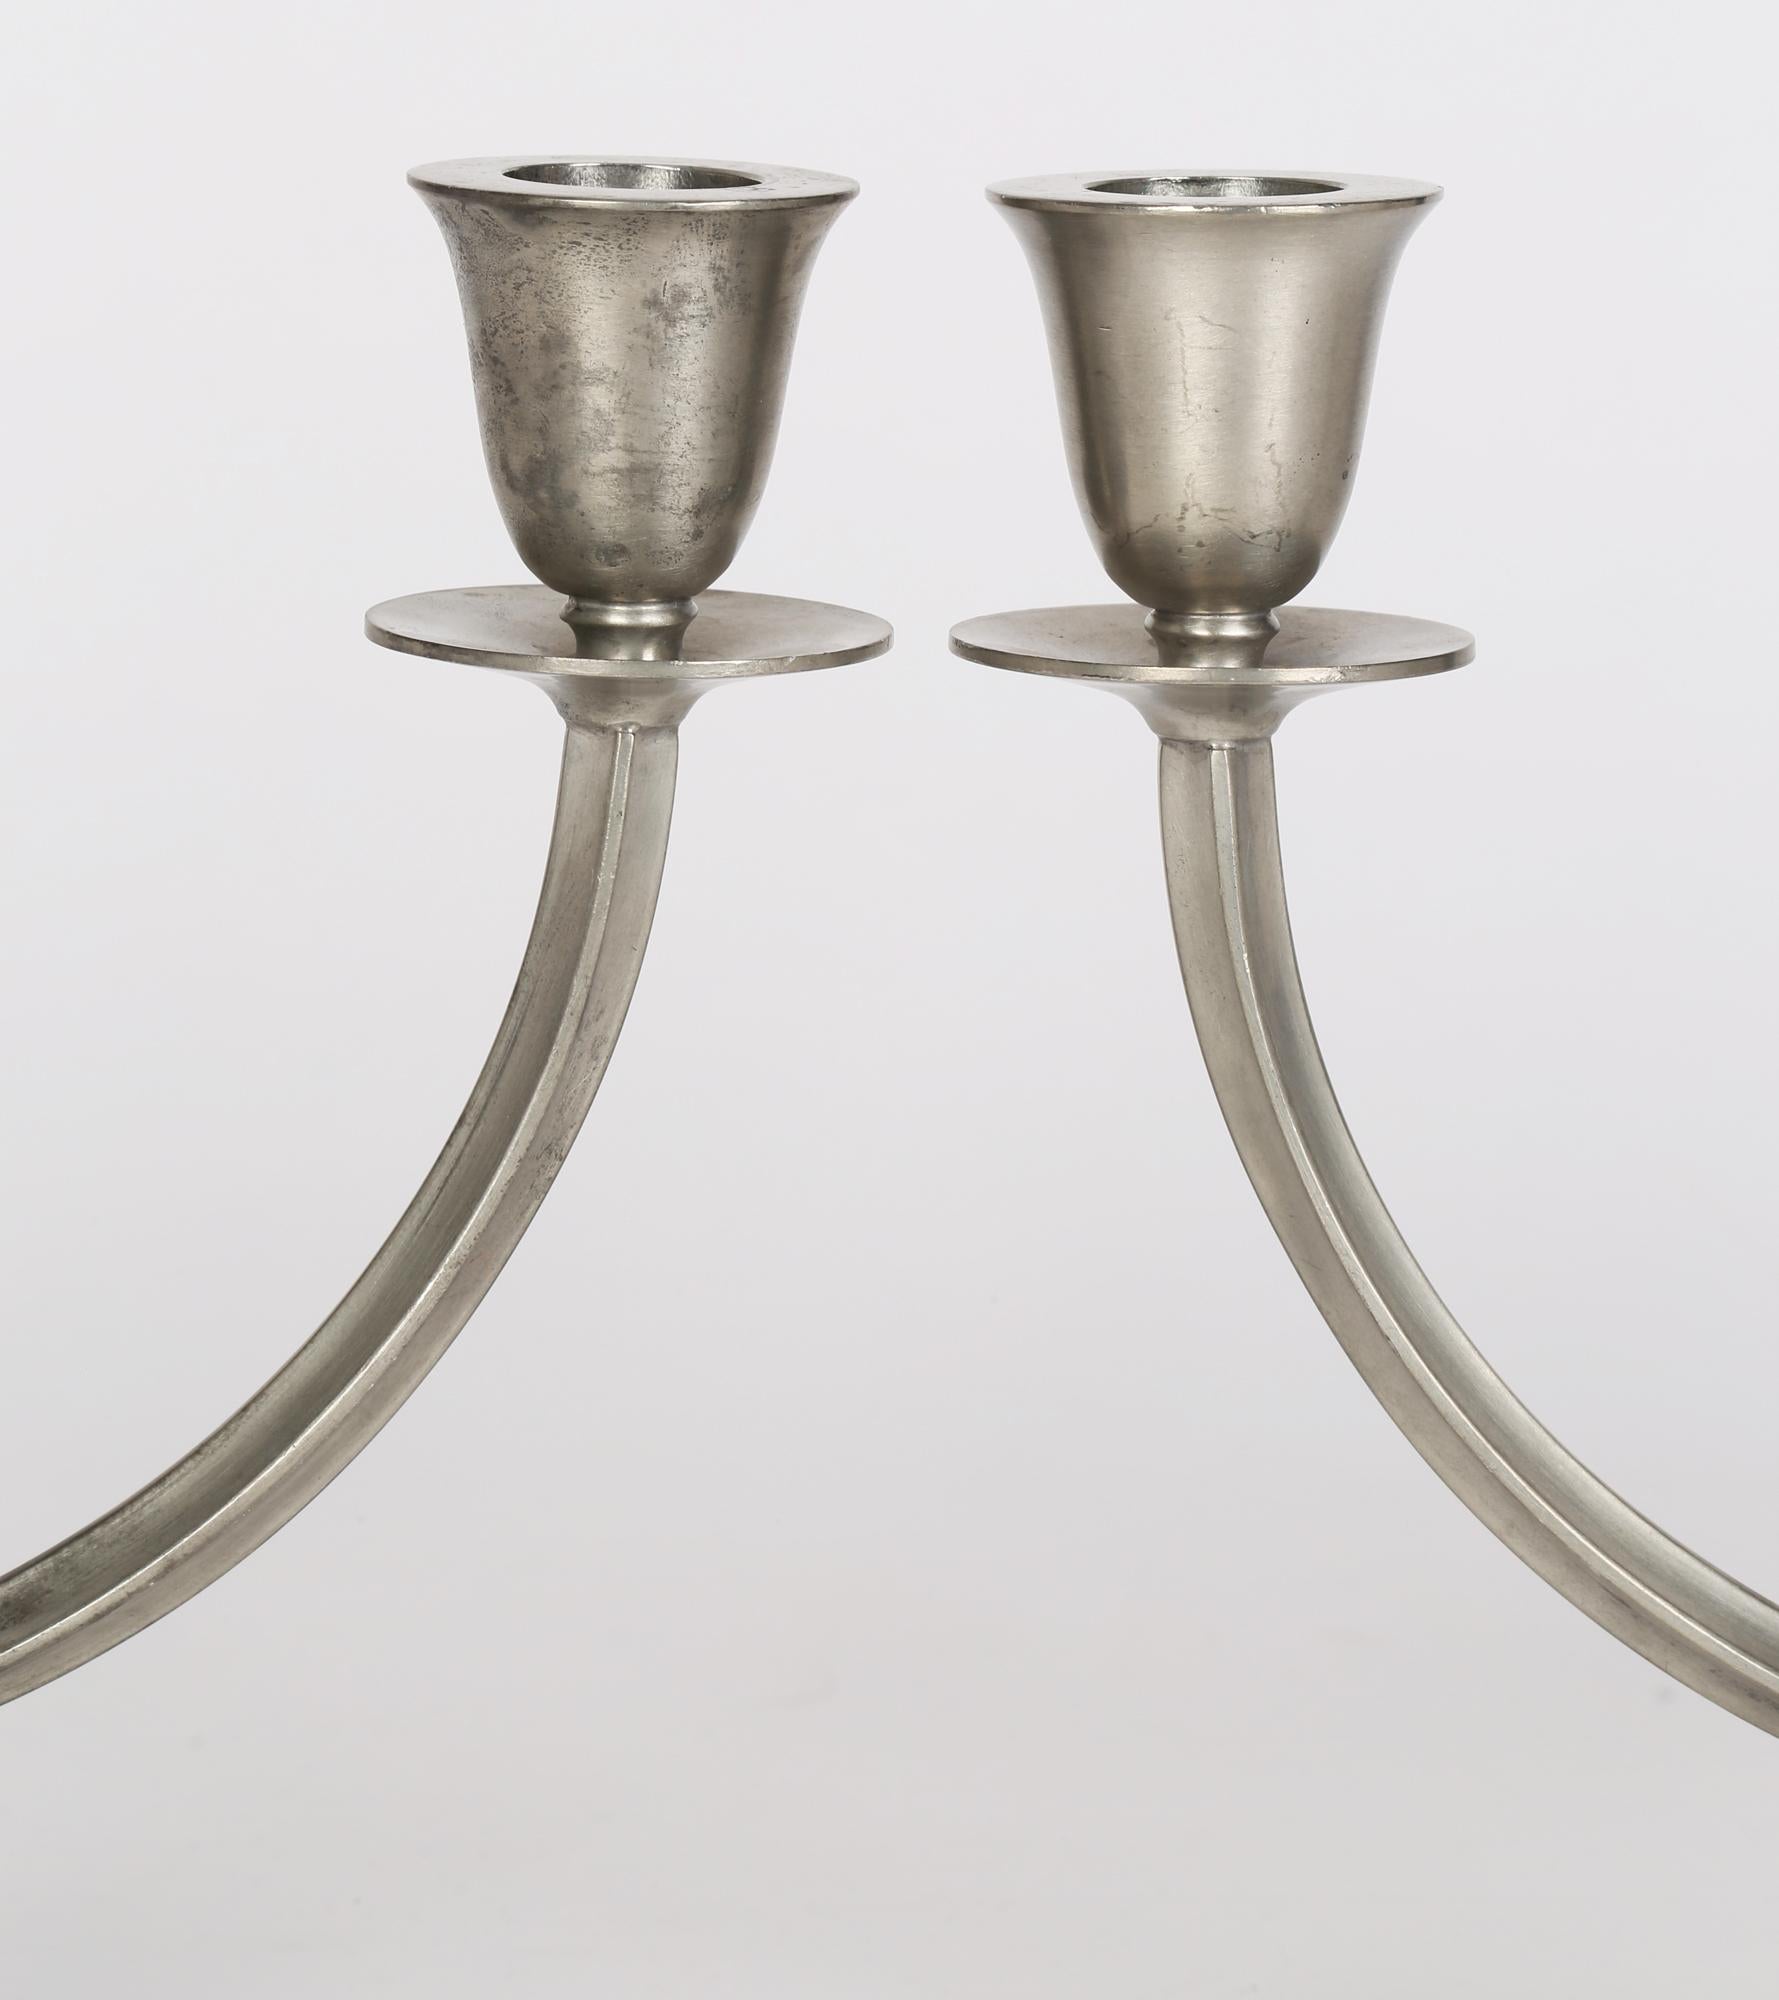 An elegant and stylish pair Danish Art Deco pewter double sconce candlesticks by Just Andersen and dating from around 1930. These candlesticks are typical of Scandinavian design and quality and both stand on an oval pedestal base with a U looped